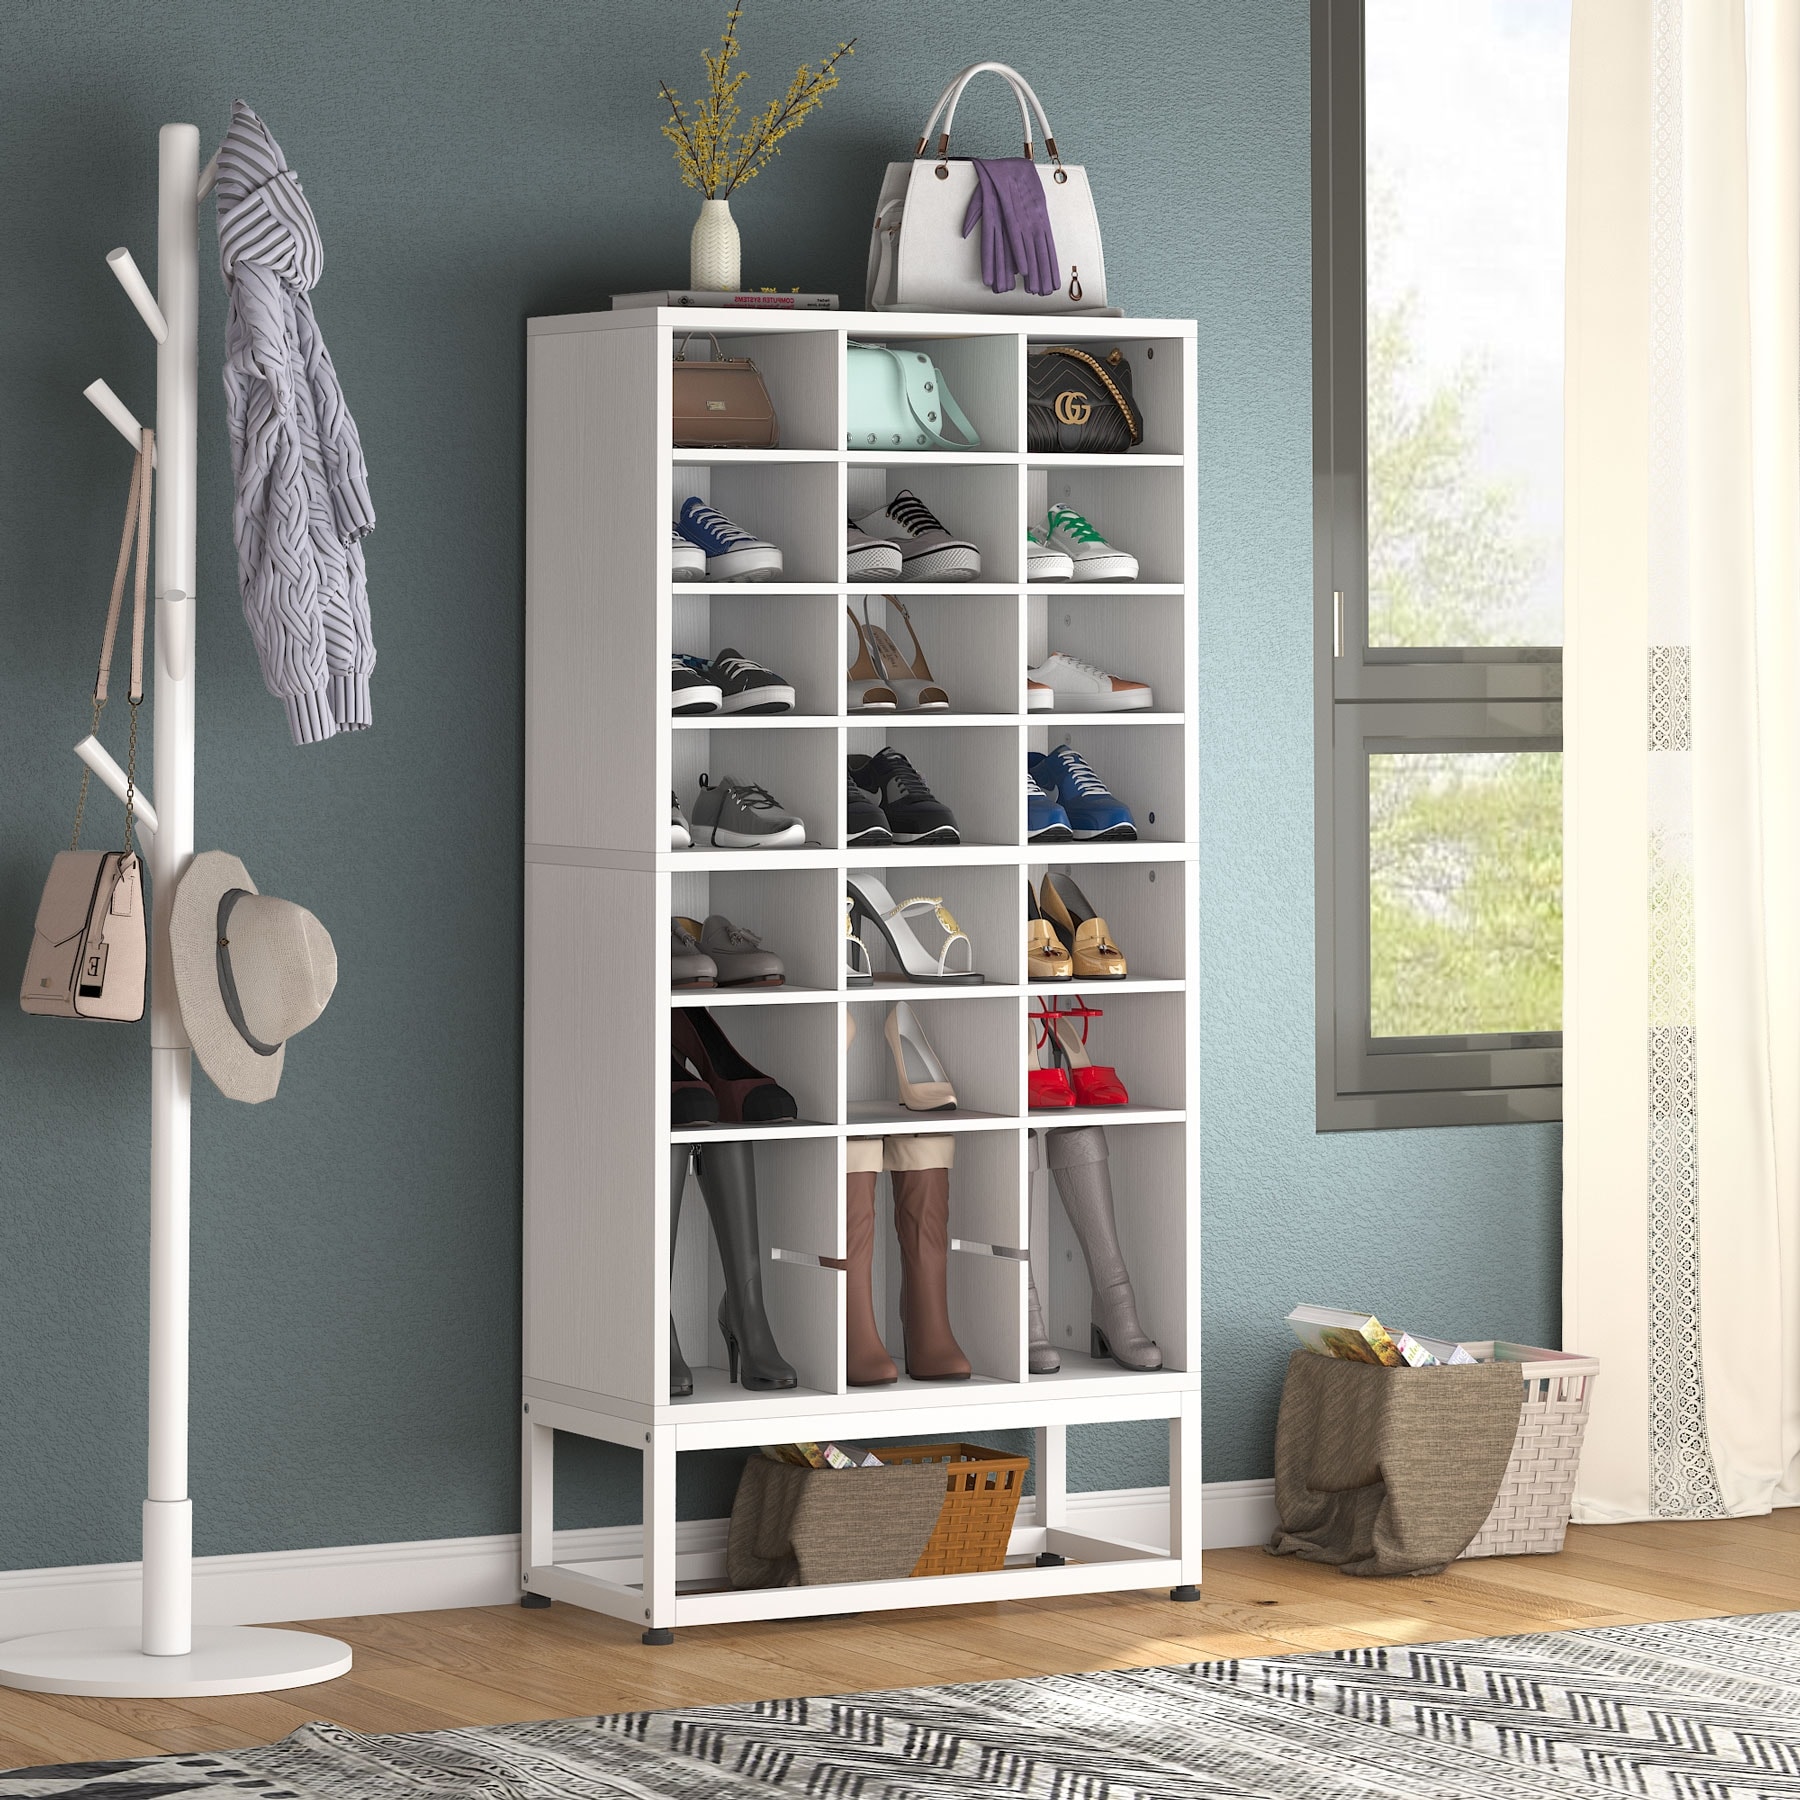 https://ak1.ostkcdn.com/images/products/is/images/direct/d8684ab9a87da19c93043f93d959c670b0260c04/24-Pair-Shoe-Storage-Cabinet-Adjustable-Shoe-Rack-Organizers%2C-8-Tier-White-Cube-Storage-Bookcase.jpg